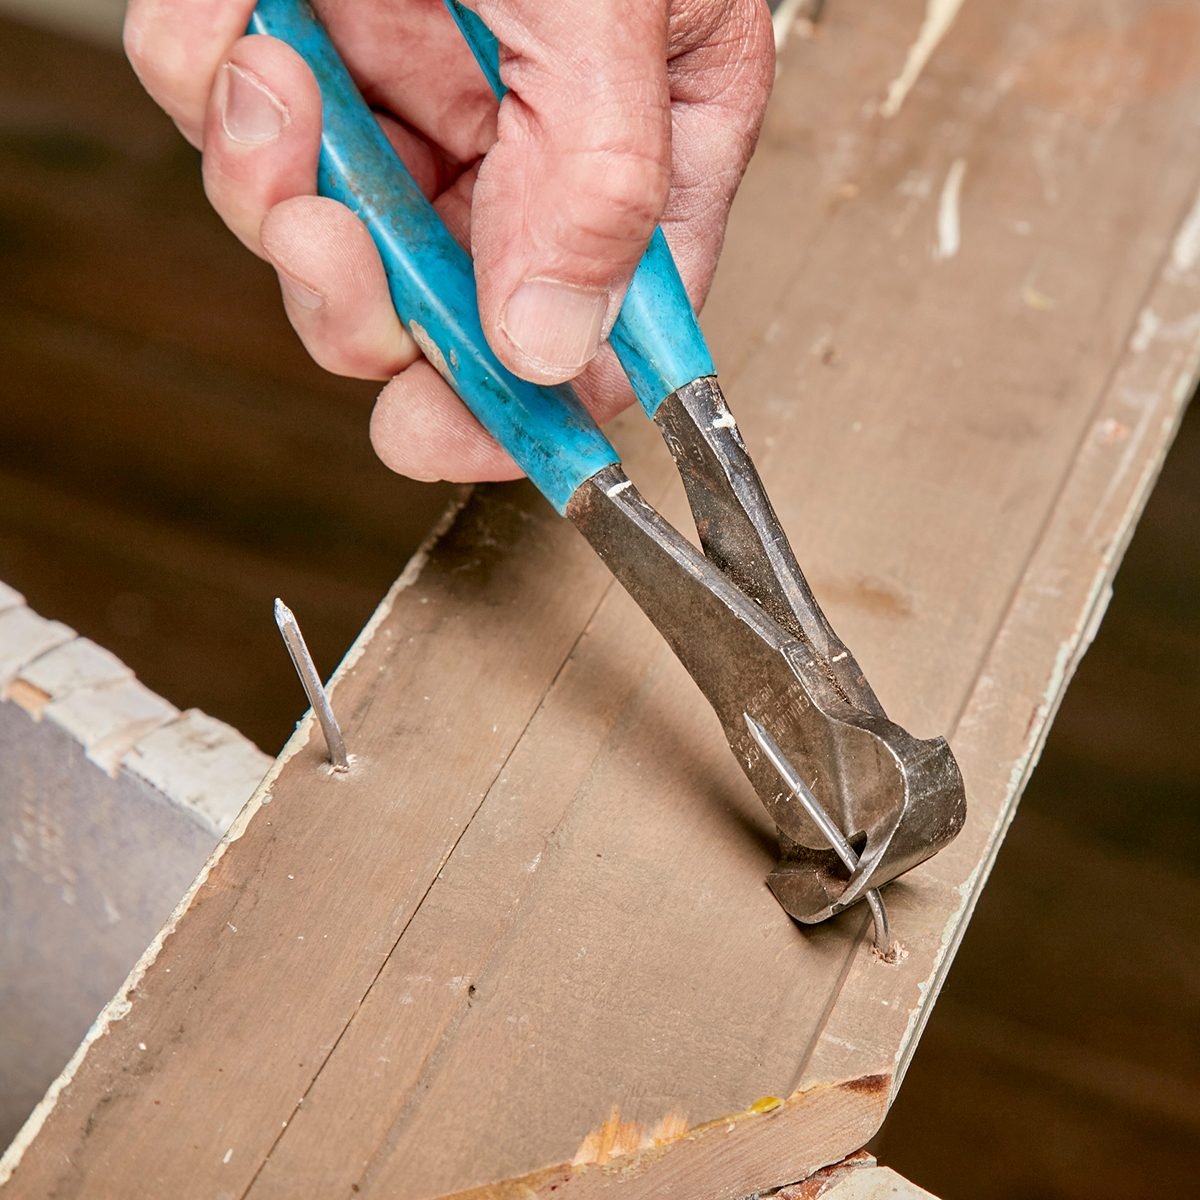 Pull nails through the back with a nippers